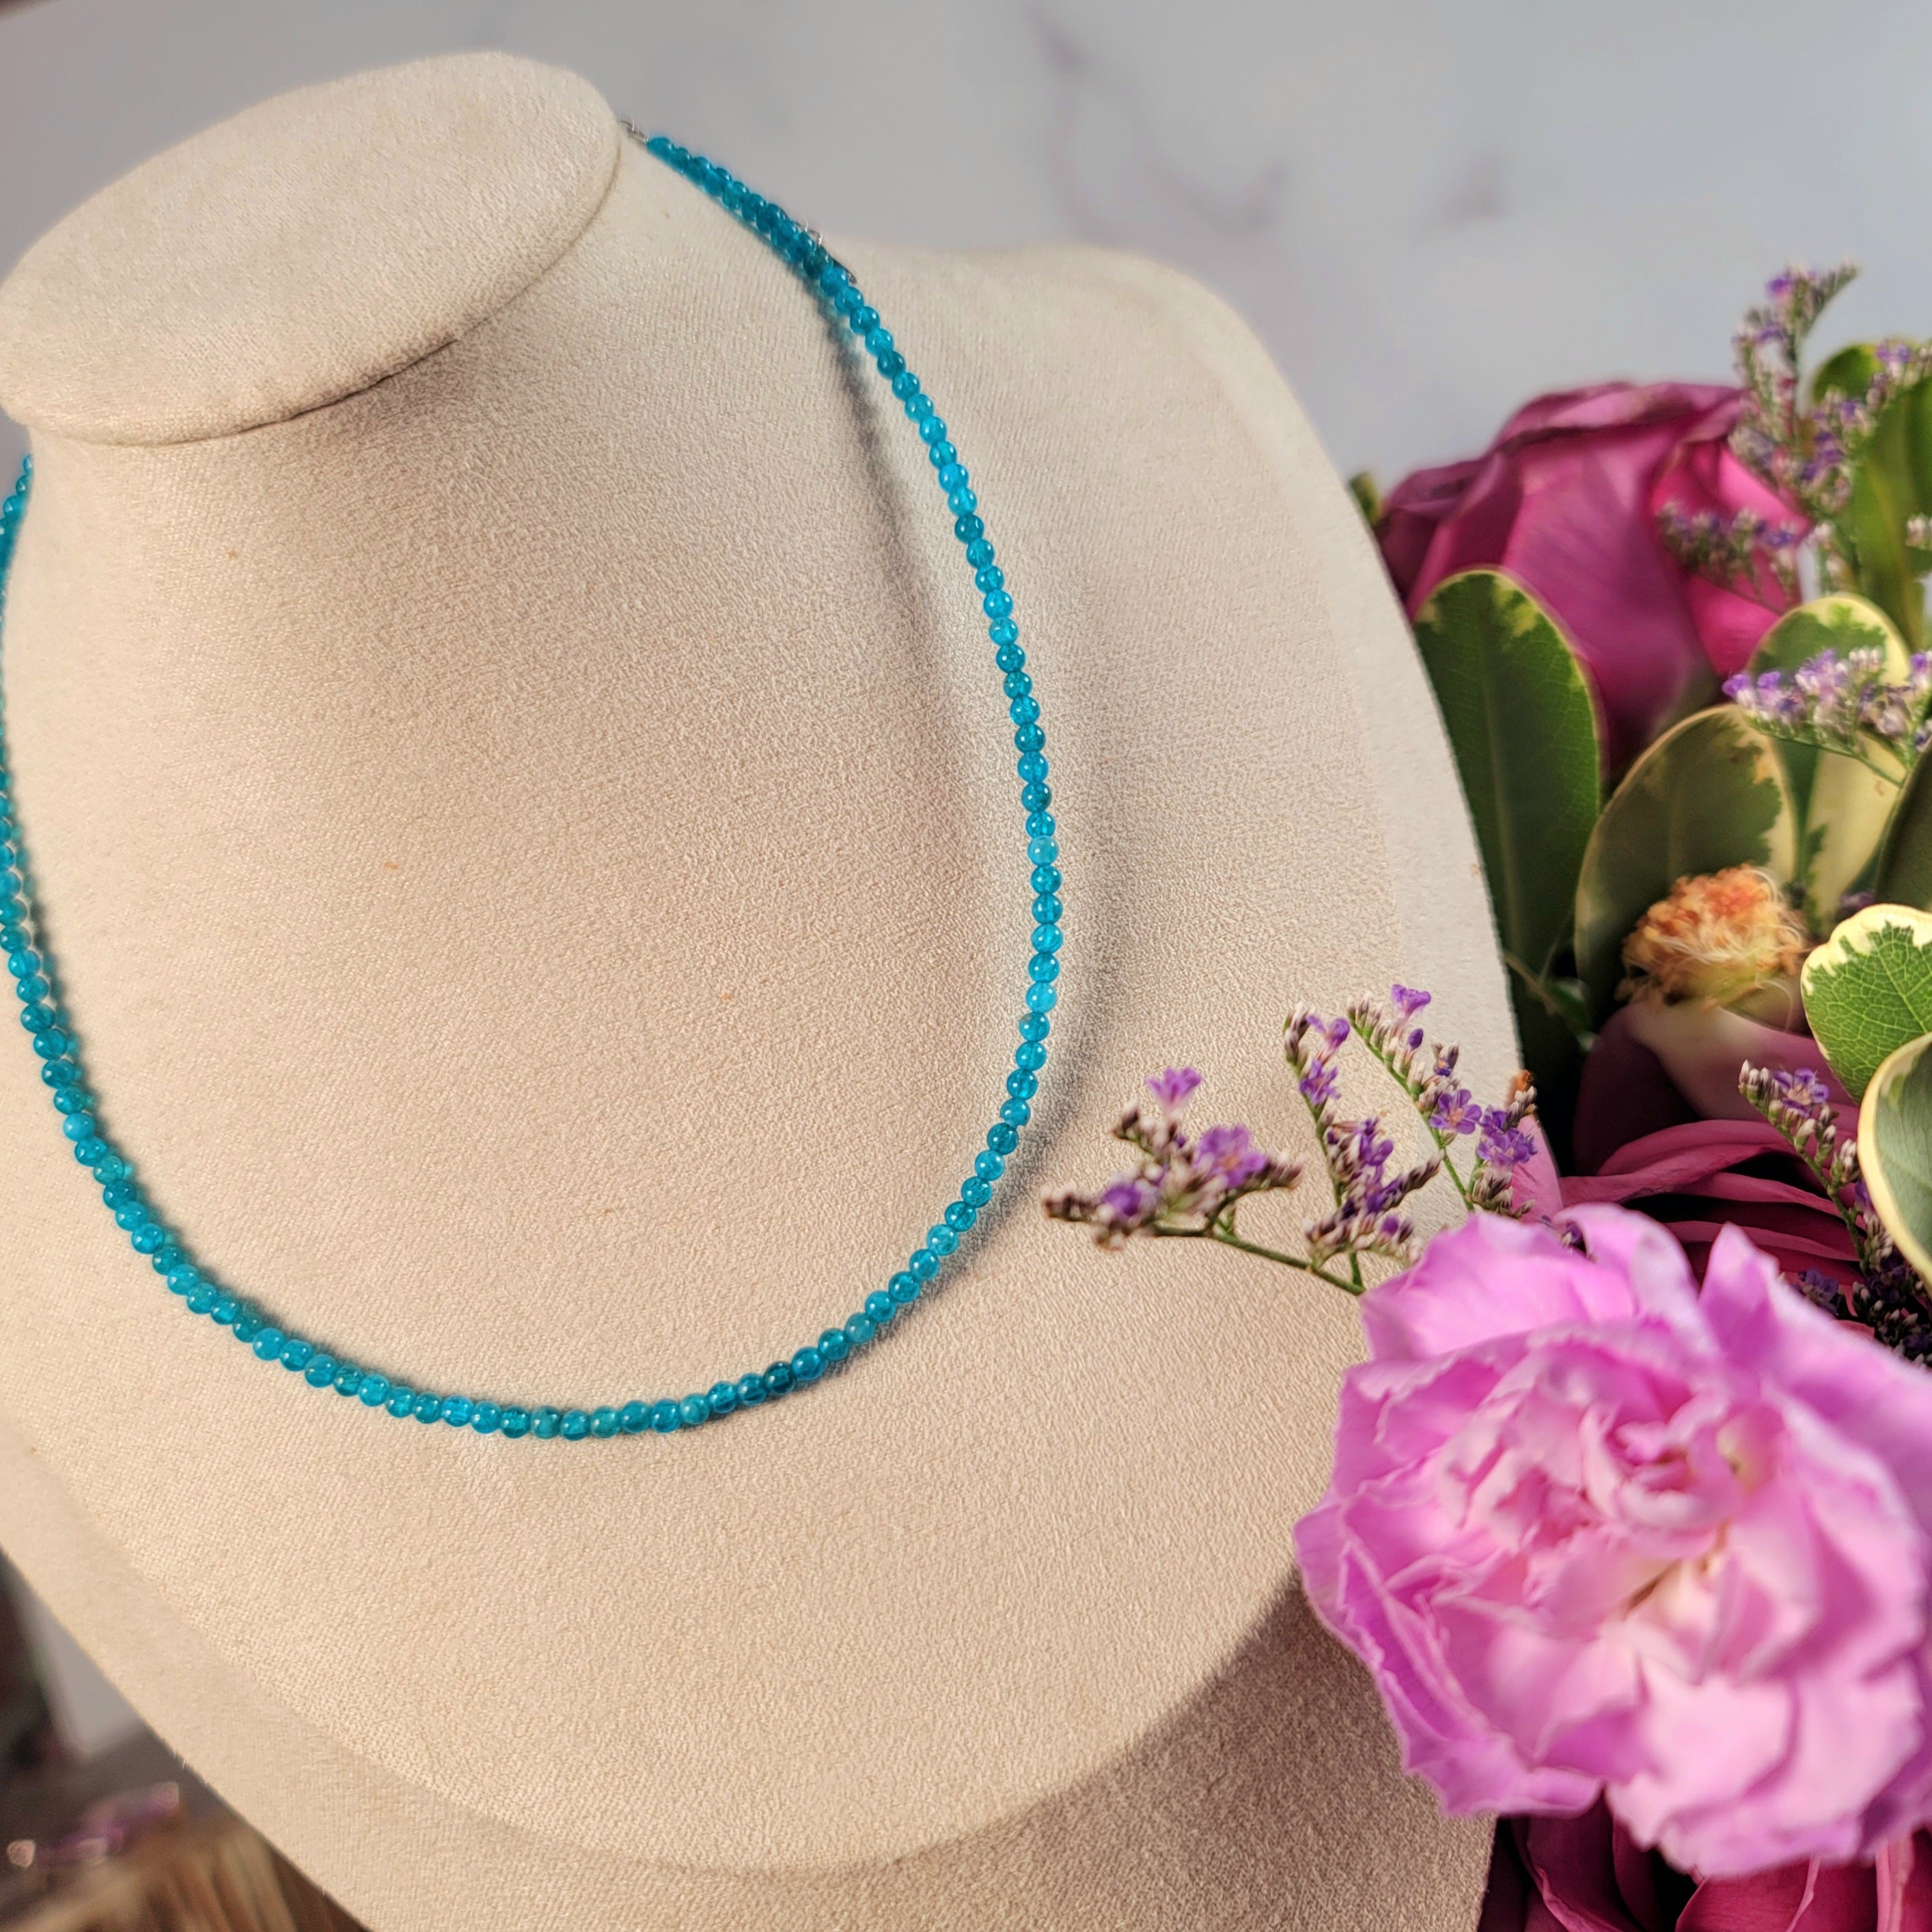 Blue Apatite Micro Round Choker/Layering Necklace for Promoting Clarity, Guidance & Unconditional Love